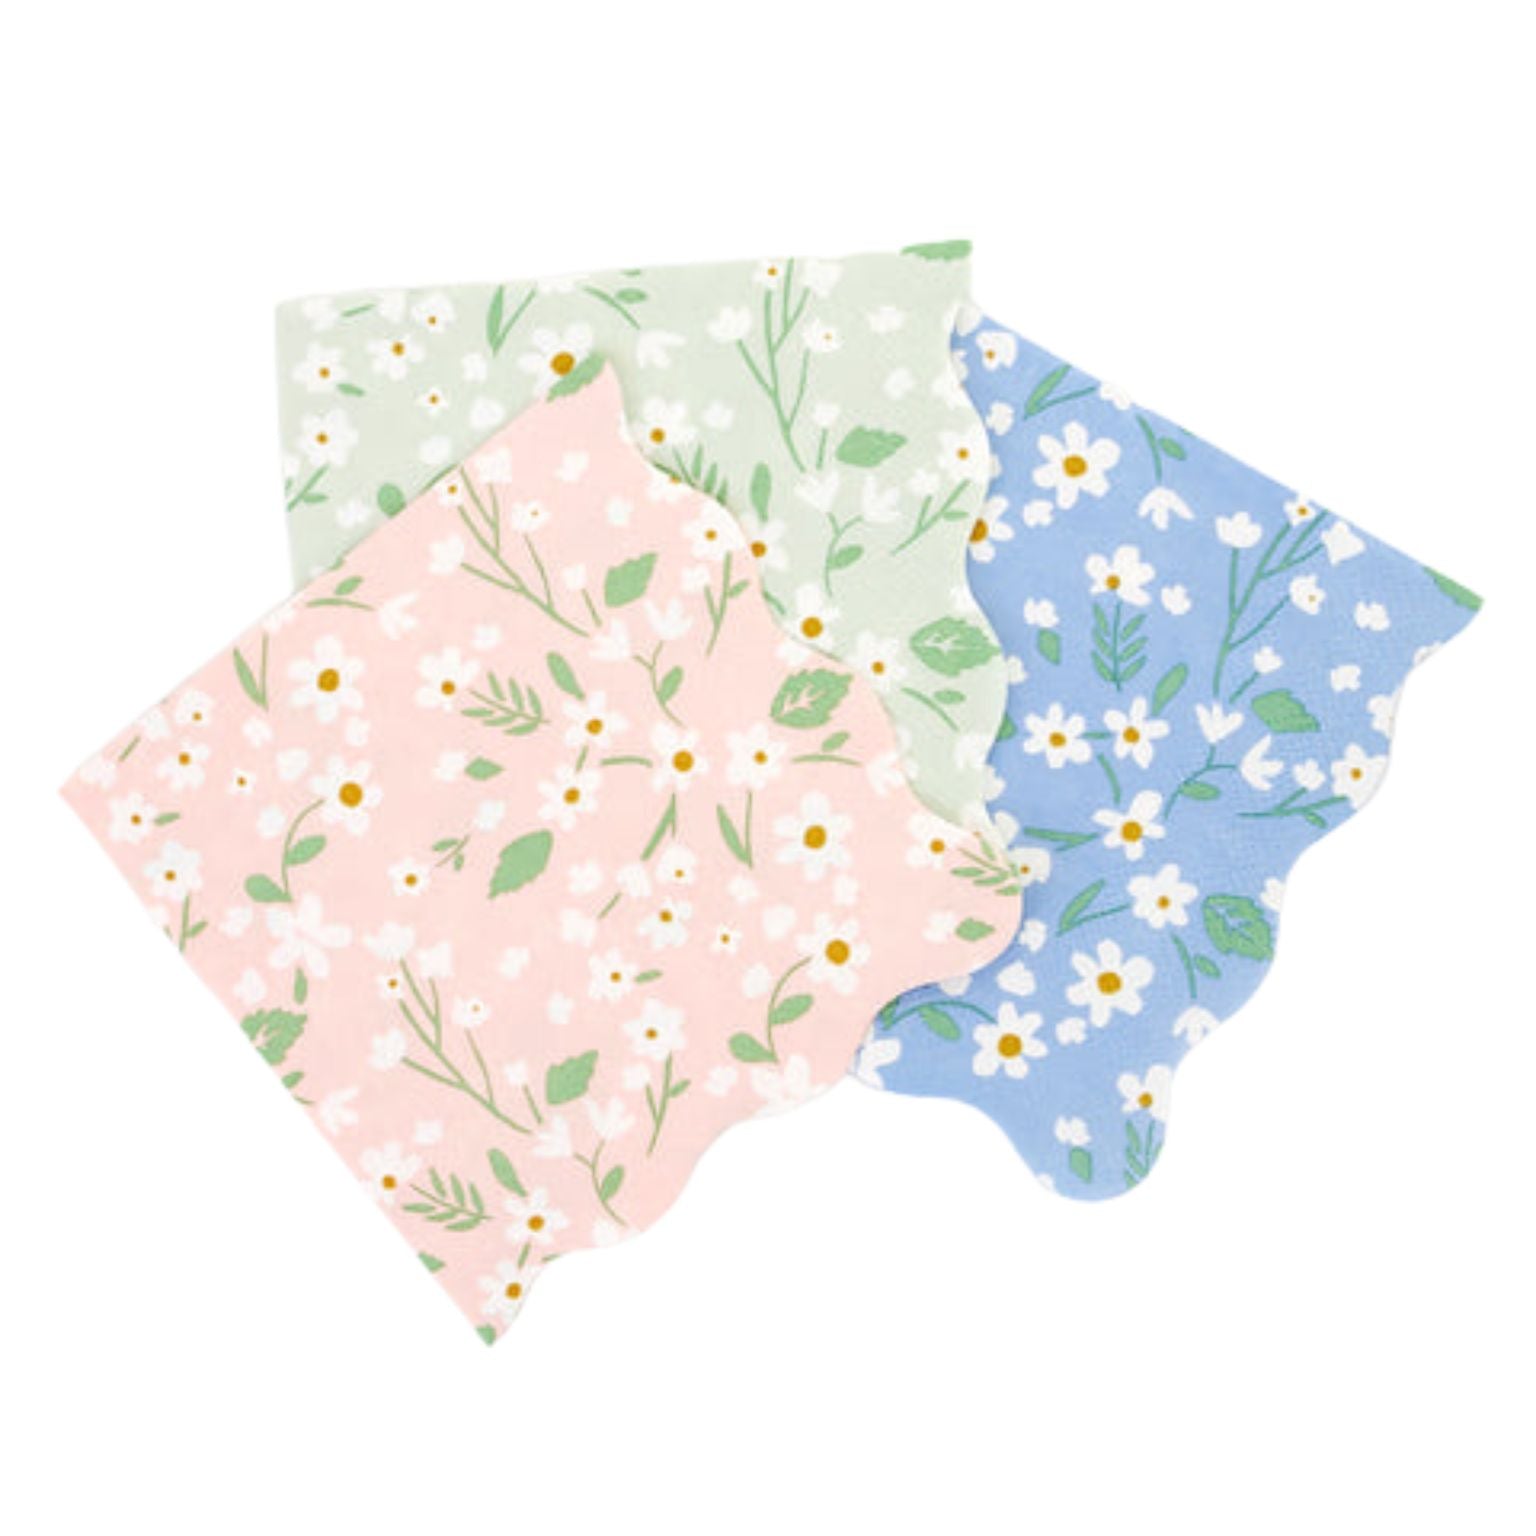 MeriMeri Ditsy Floral Small Napkins (PK20)  with assorted colors